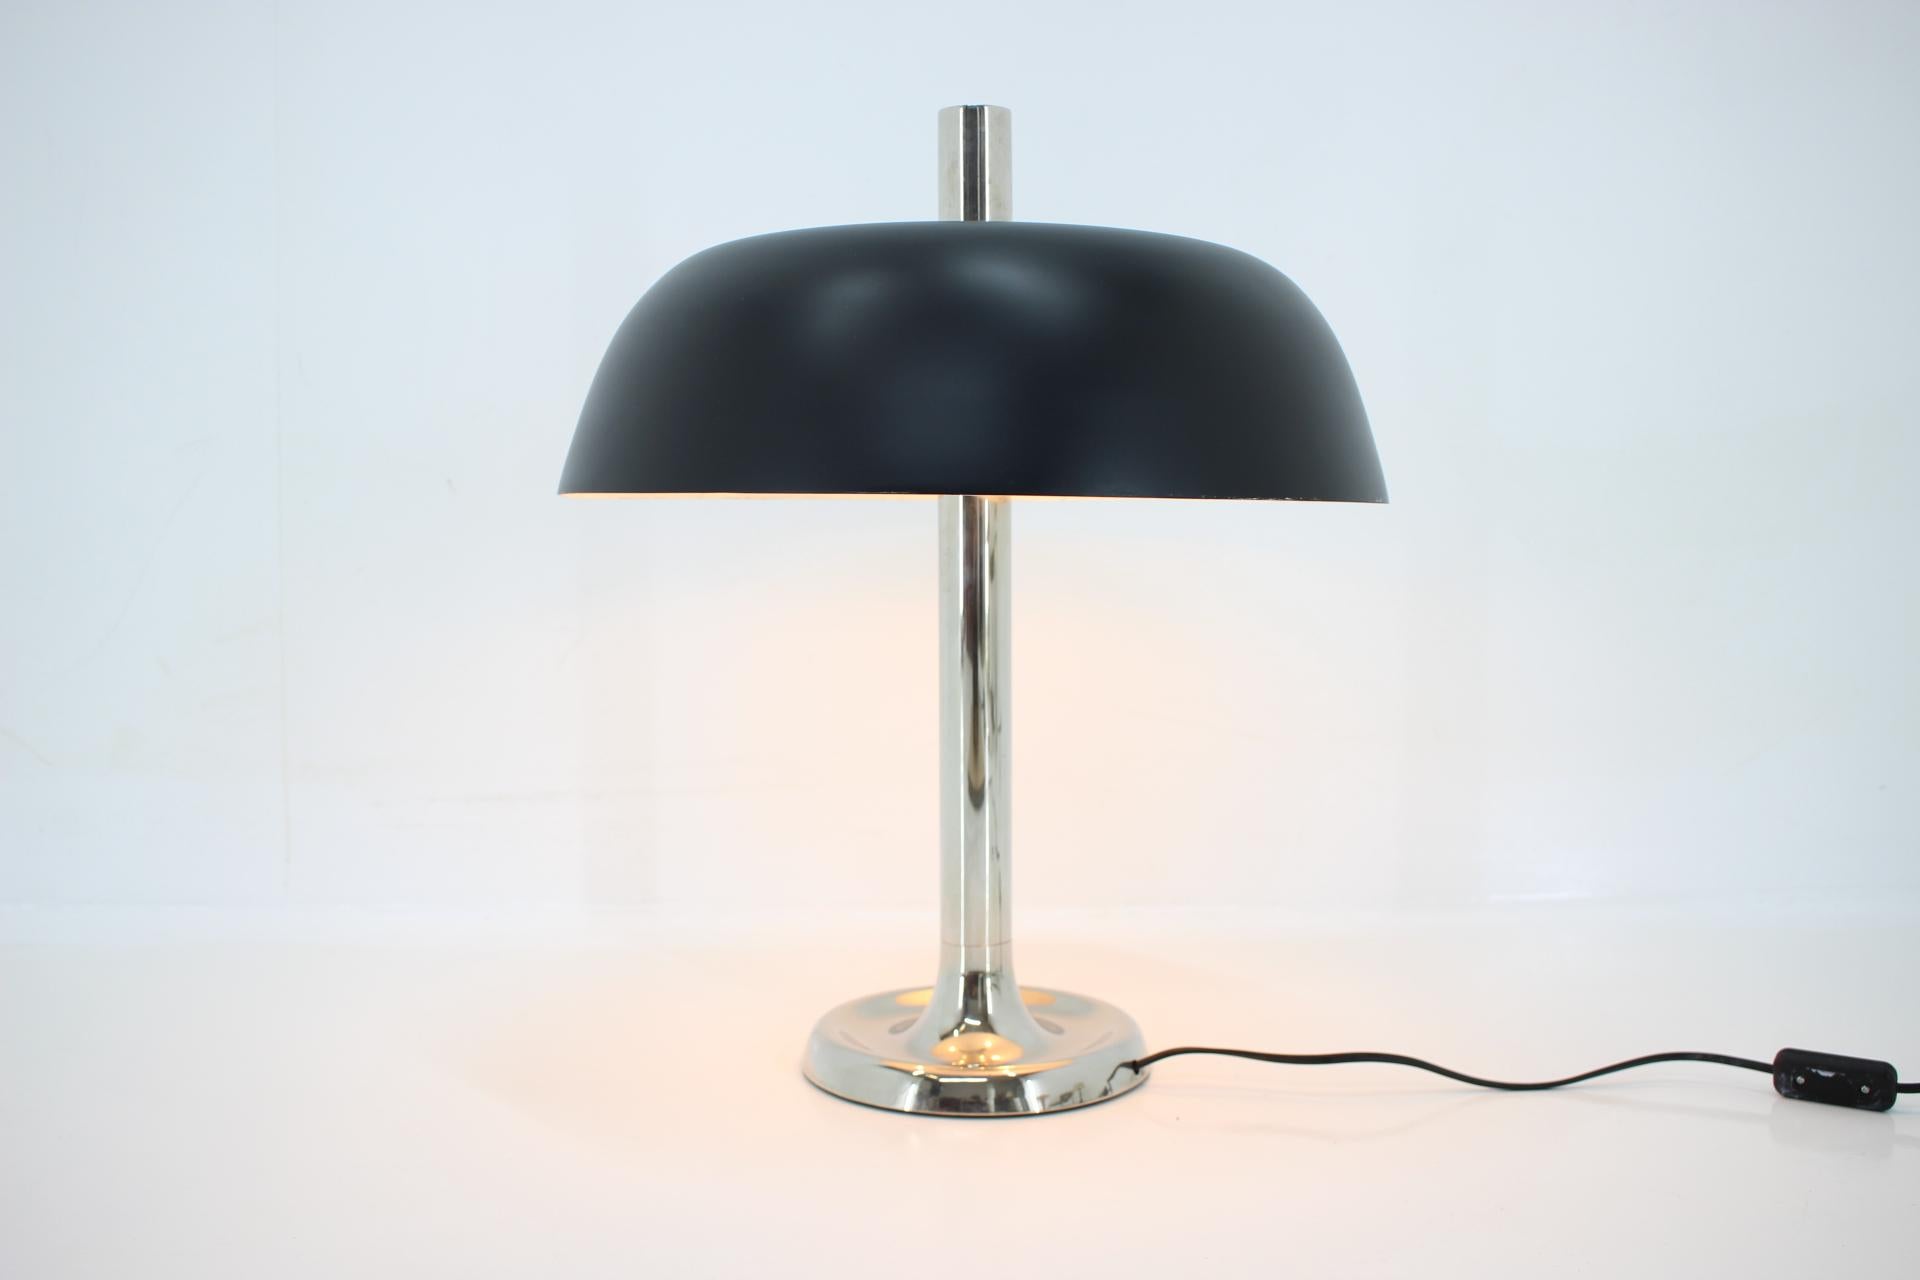 Lacquered Big Design Extra Large Midcentury Mushroom Table Lamp by Hillebrand, 1970s For Sale